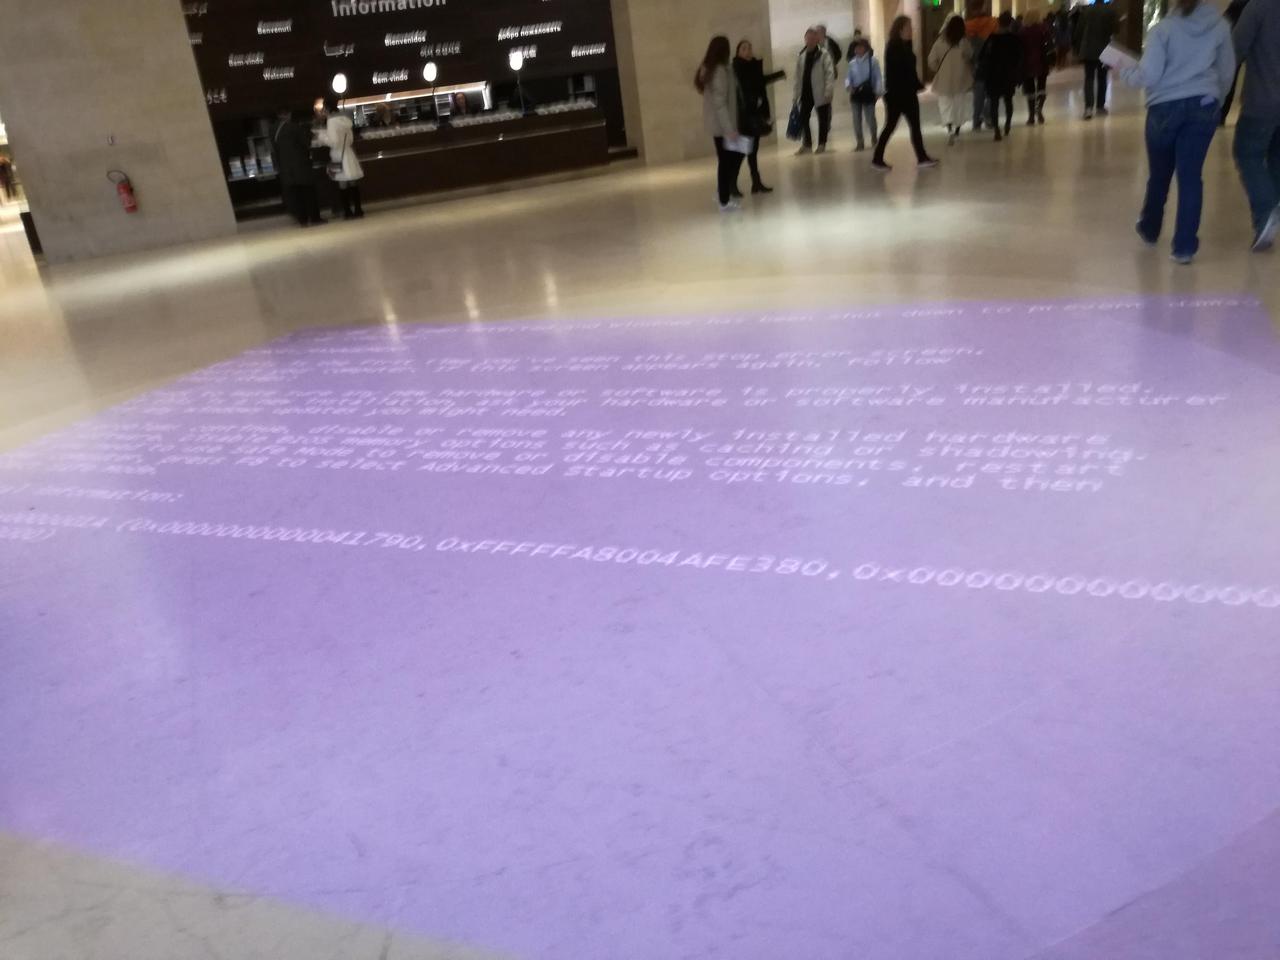 Windows bsod at the louvre museum is a digital piece of art 529703 2  1